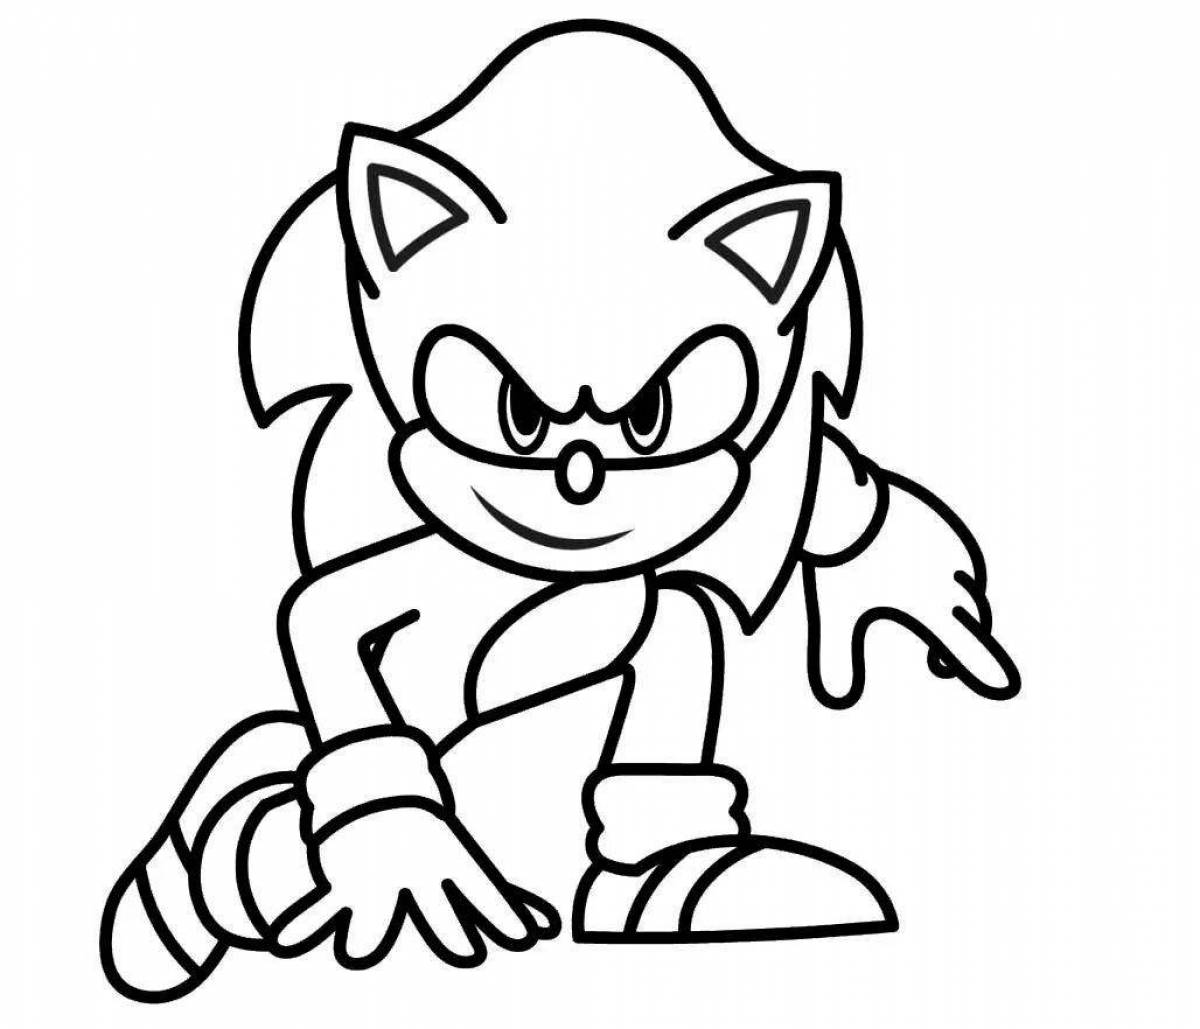 Fun sonic exe coloring book for kids